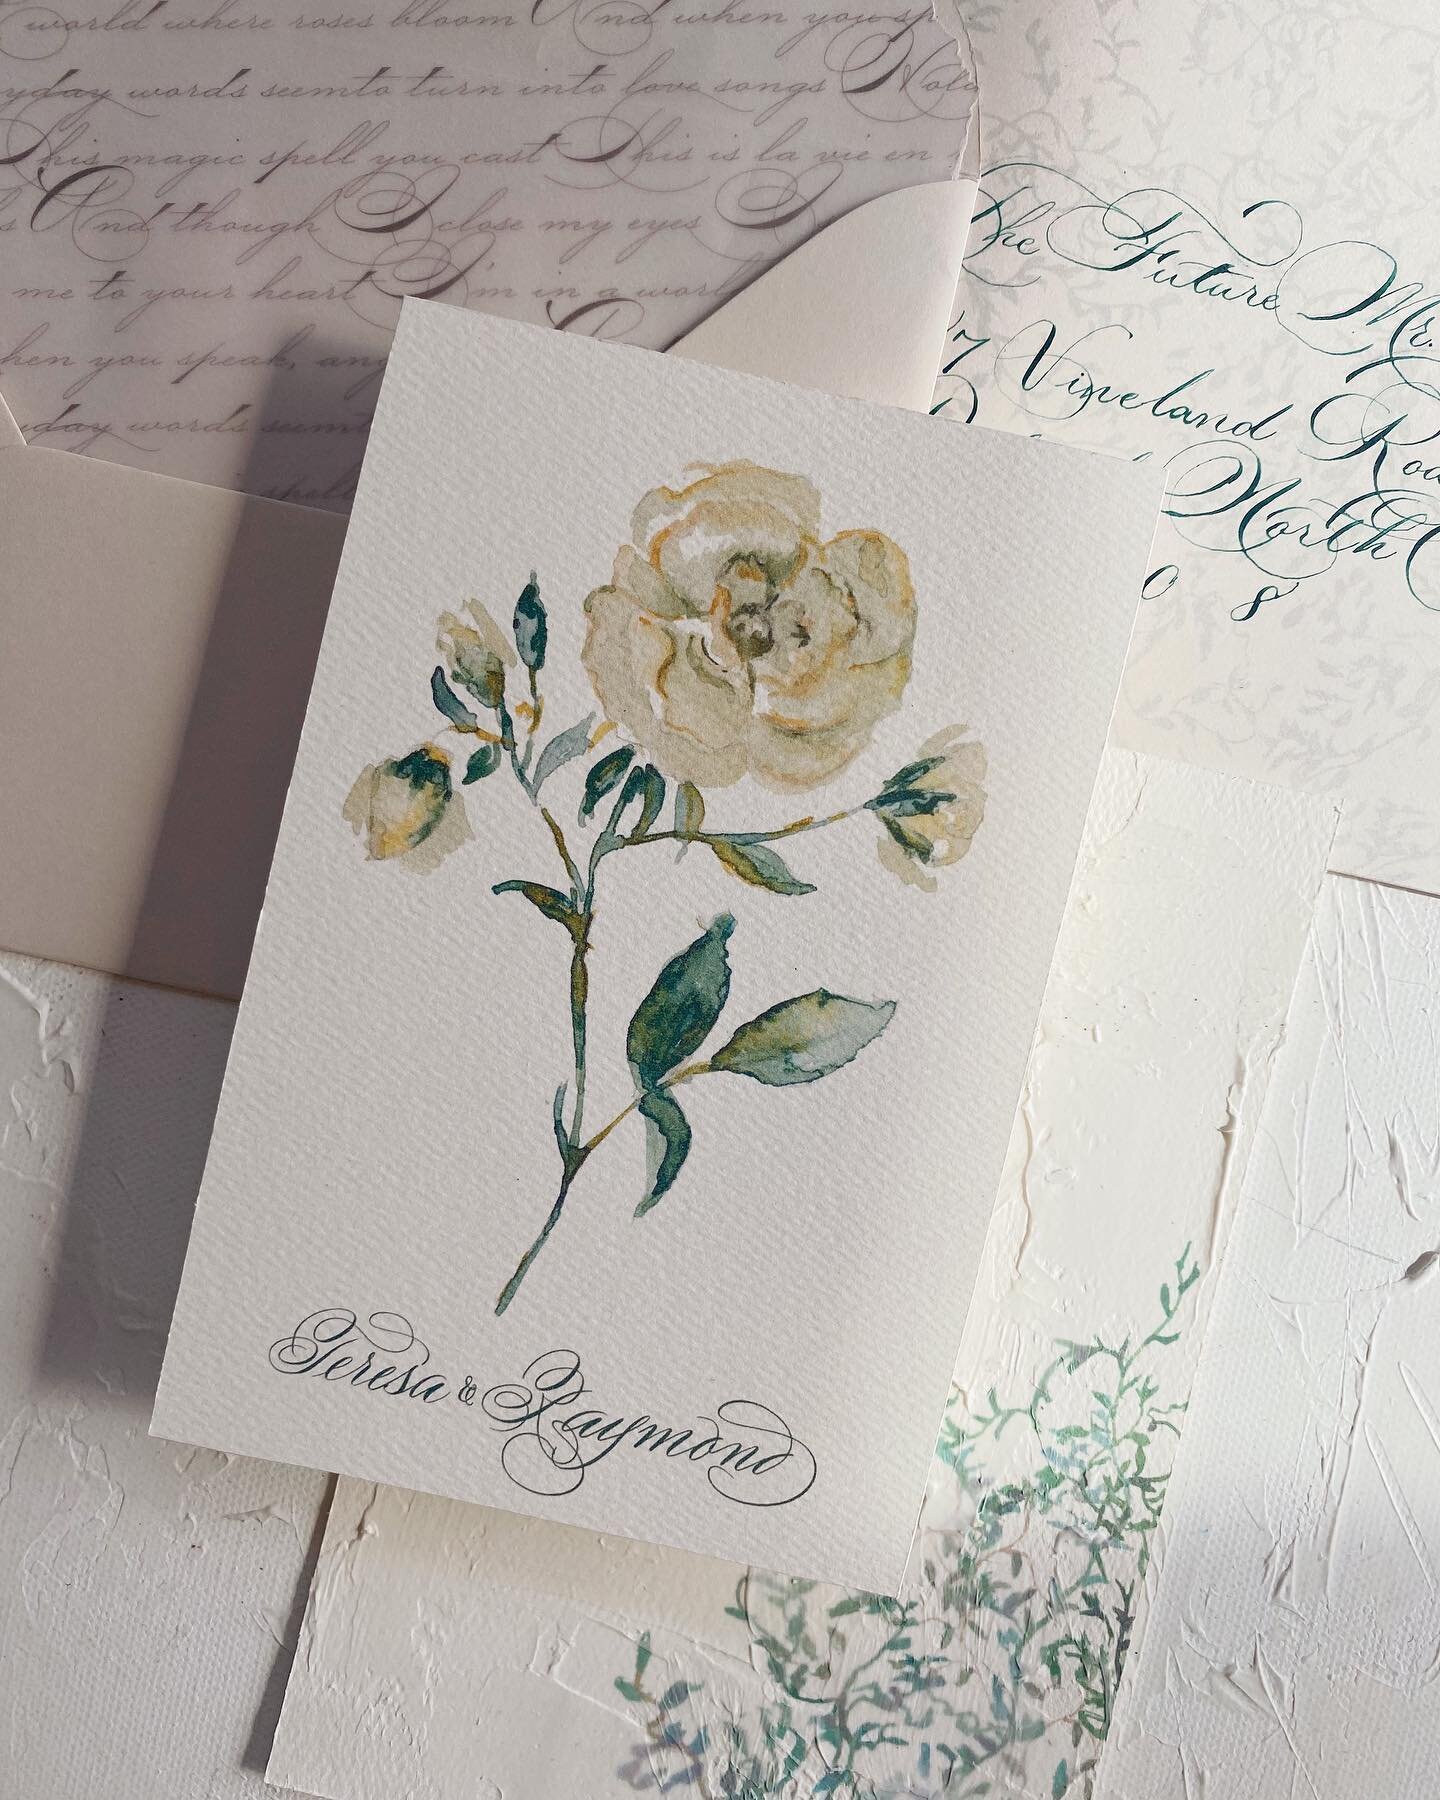 Want to add a fine art feel to your wedding invitations?

Then include fine art! A simple print enclosure of a custom painting to match your suite&rsquo;s aesthetic is a gorgeous and unique way to add a fine art touch. Plus, your guests will feel lik